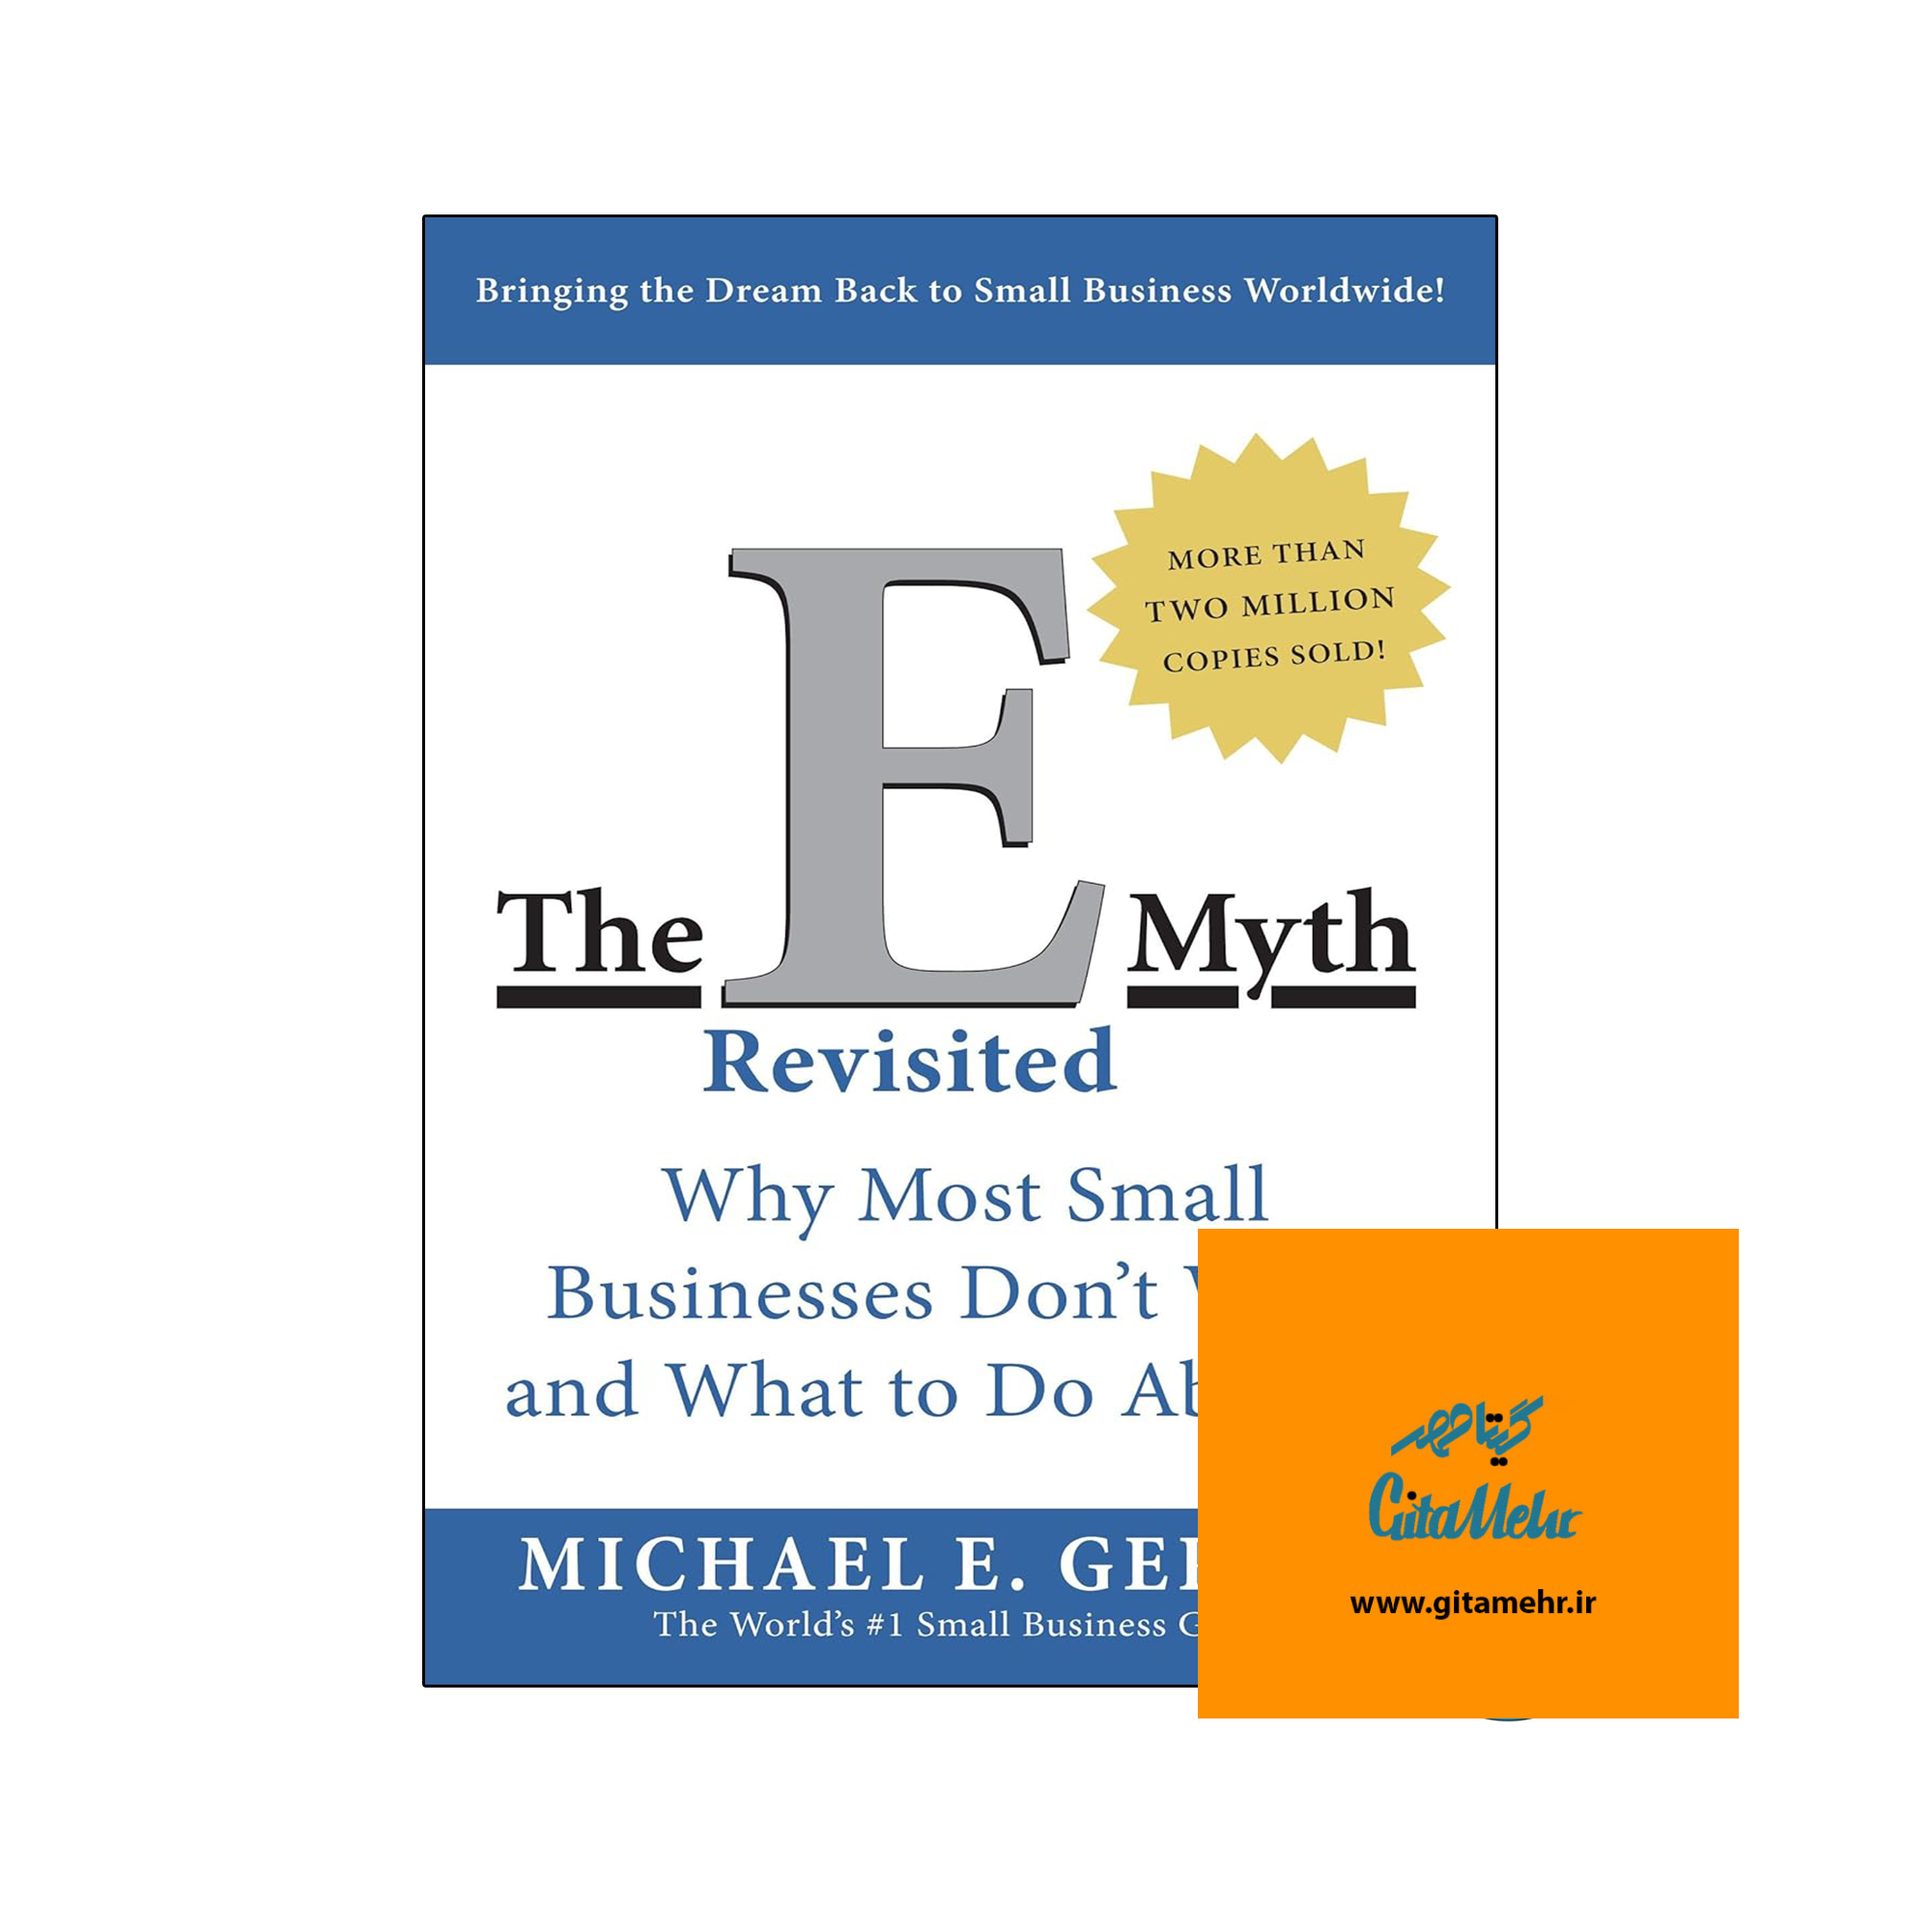 daa9d8aad8a7d8a8 the e myth revisited why most small businesses dont work and what to do about it 65ecb0355280e